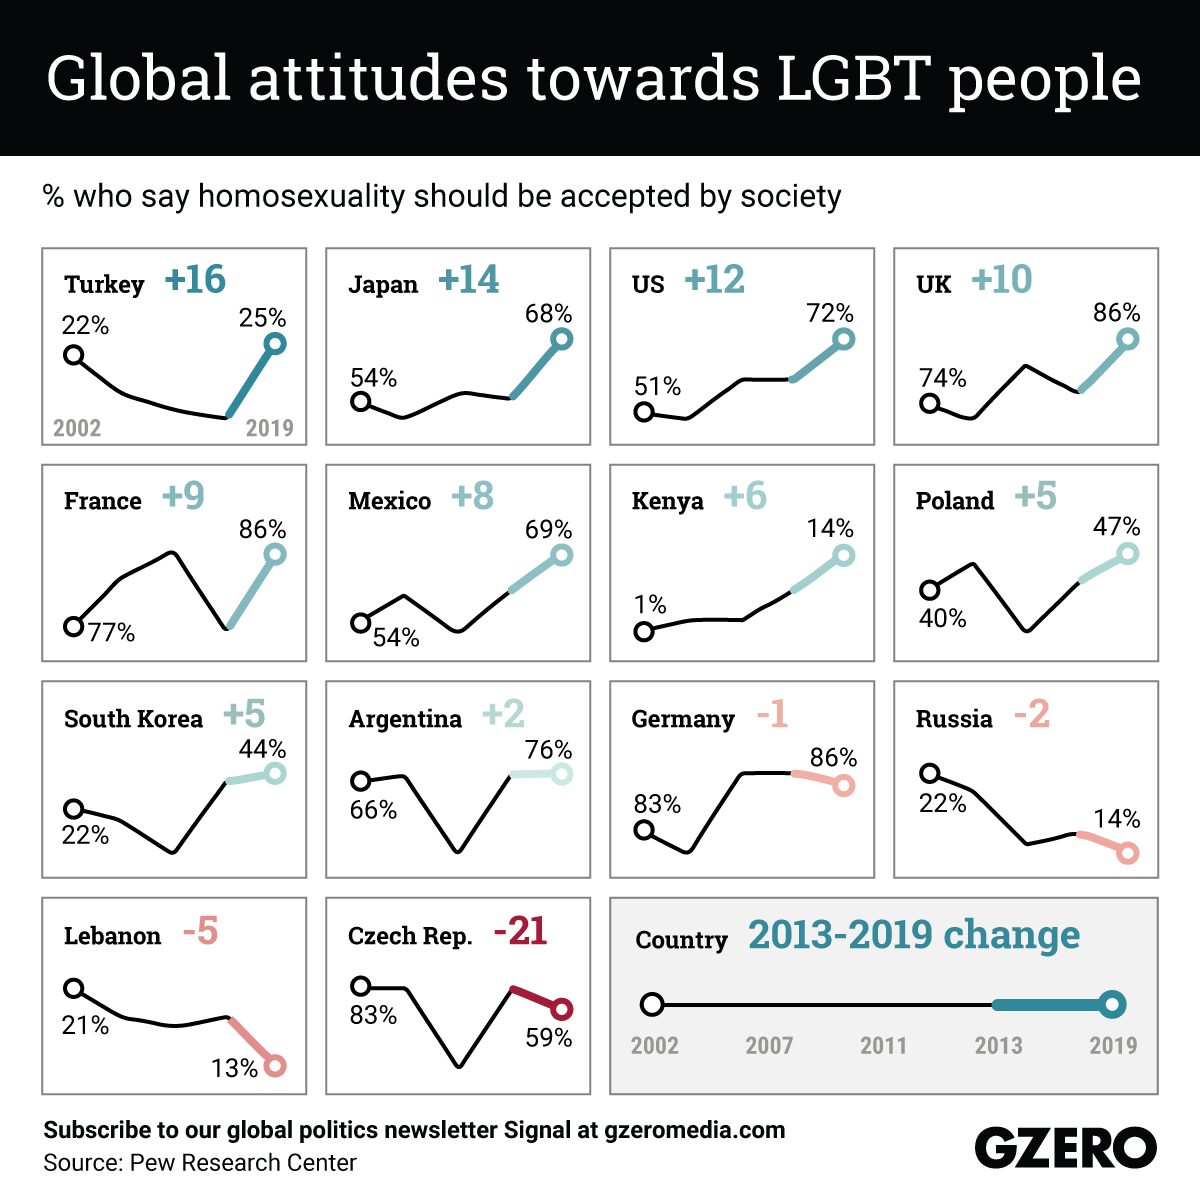 The Graphic Truth: Global attitudes towards LGBT people